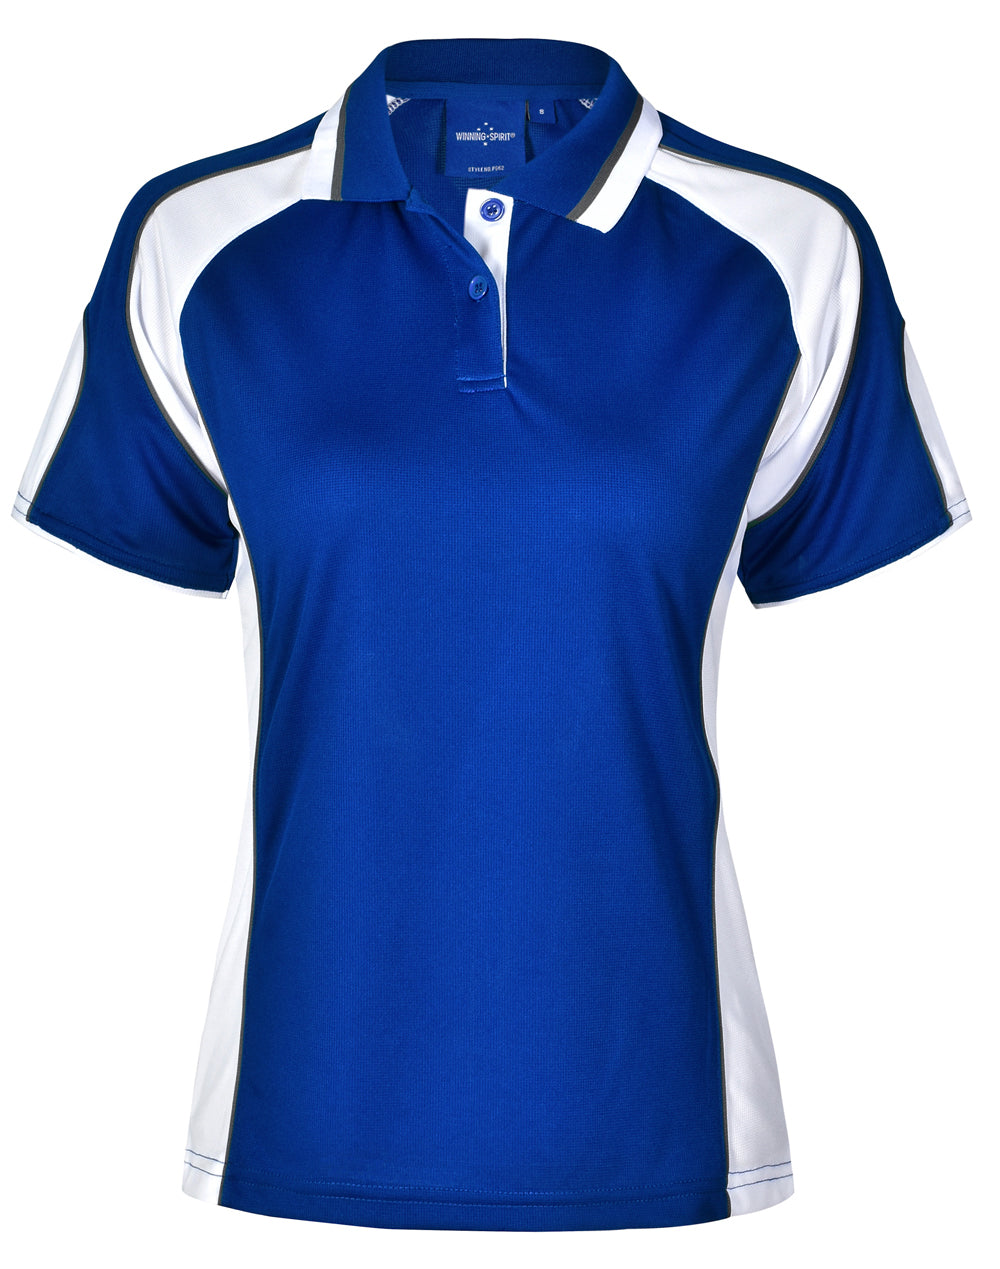 Ladies Cooldry Contrast Polo Sleeve Panels - PS62 (8 colours)